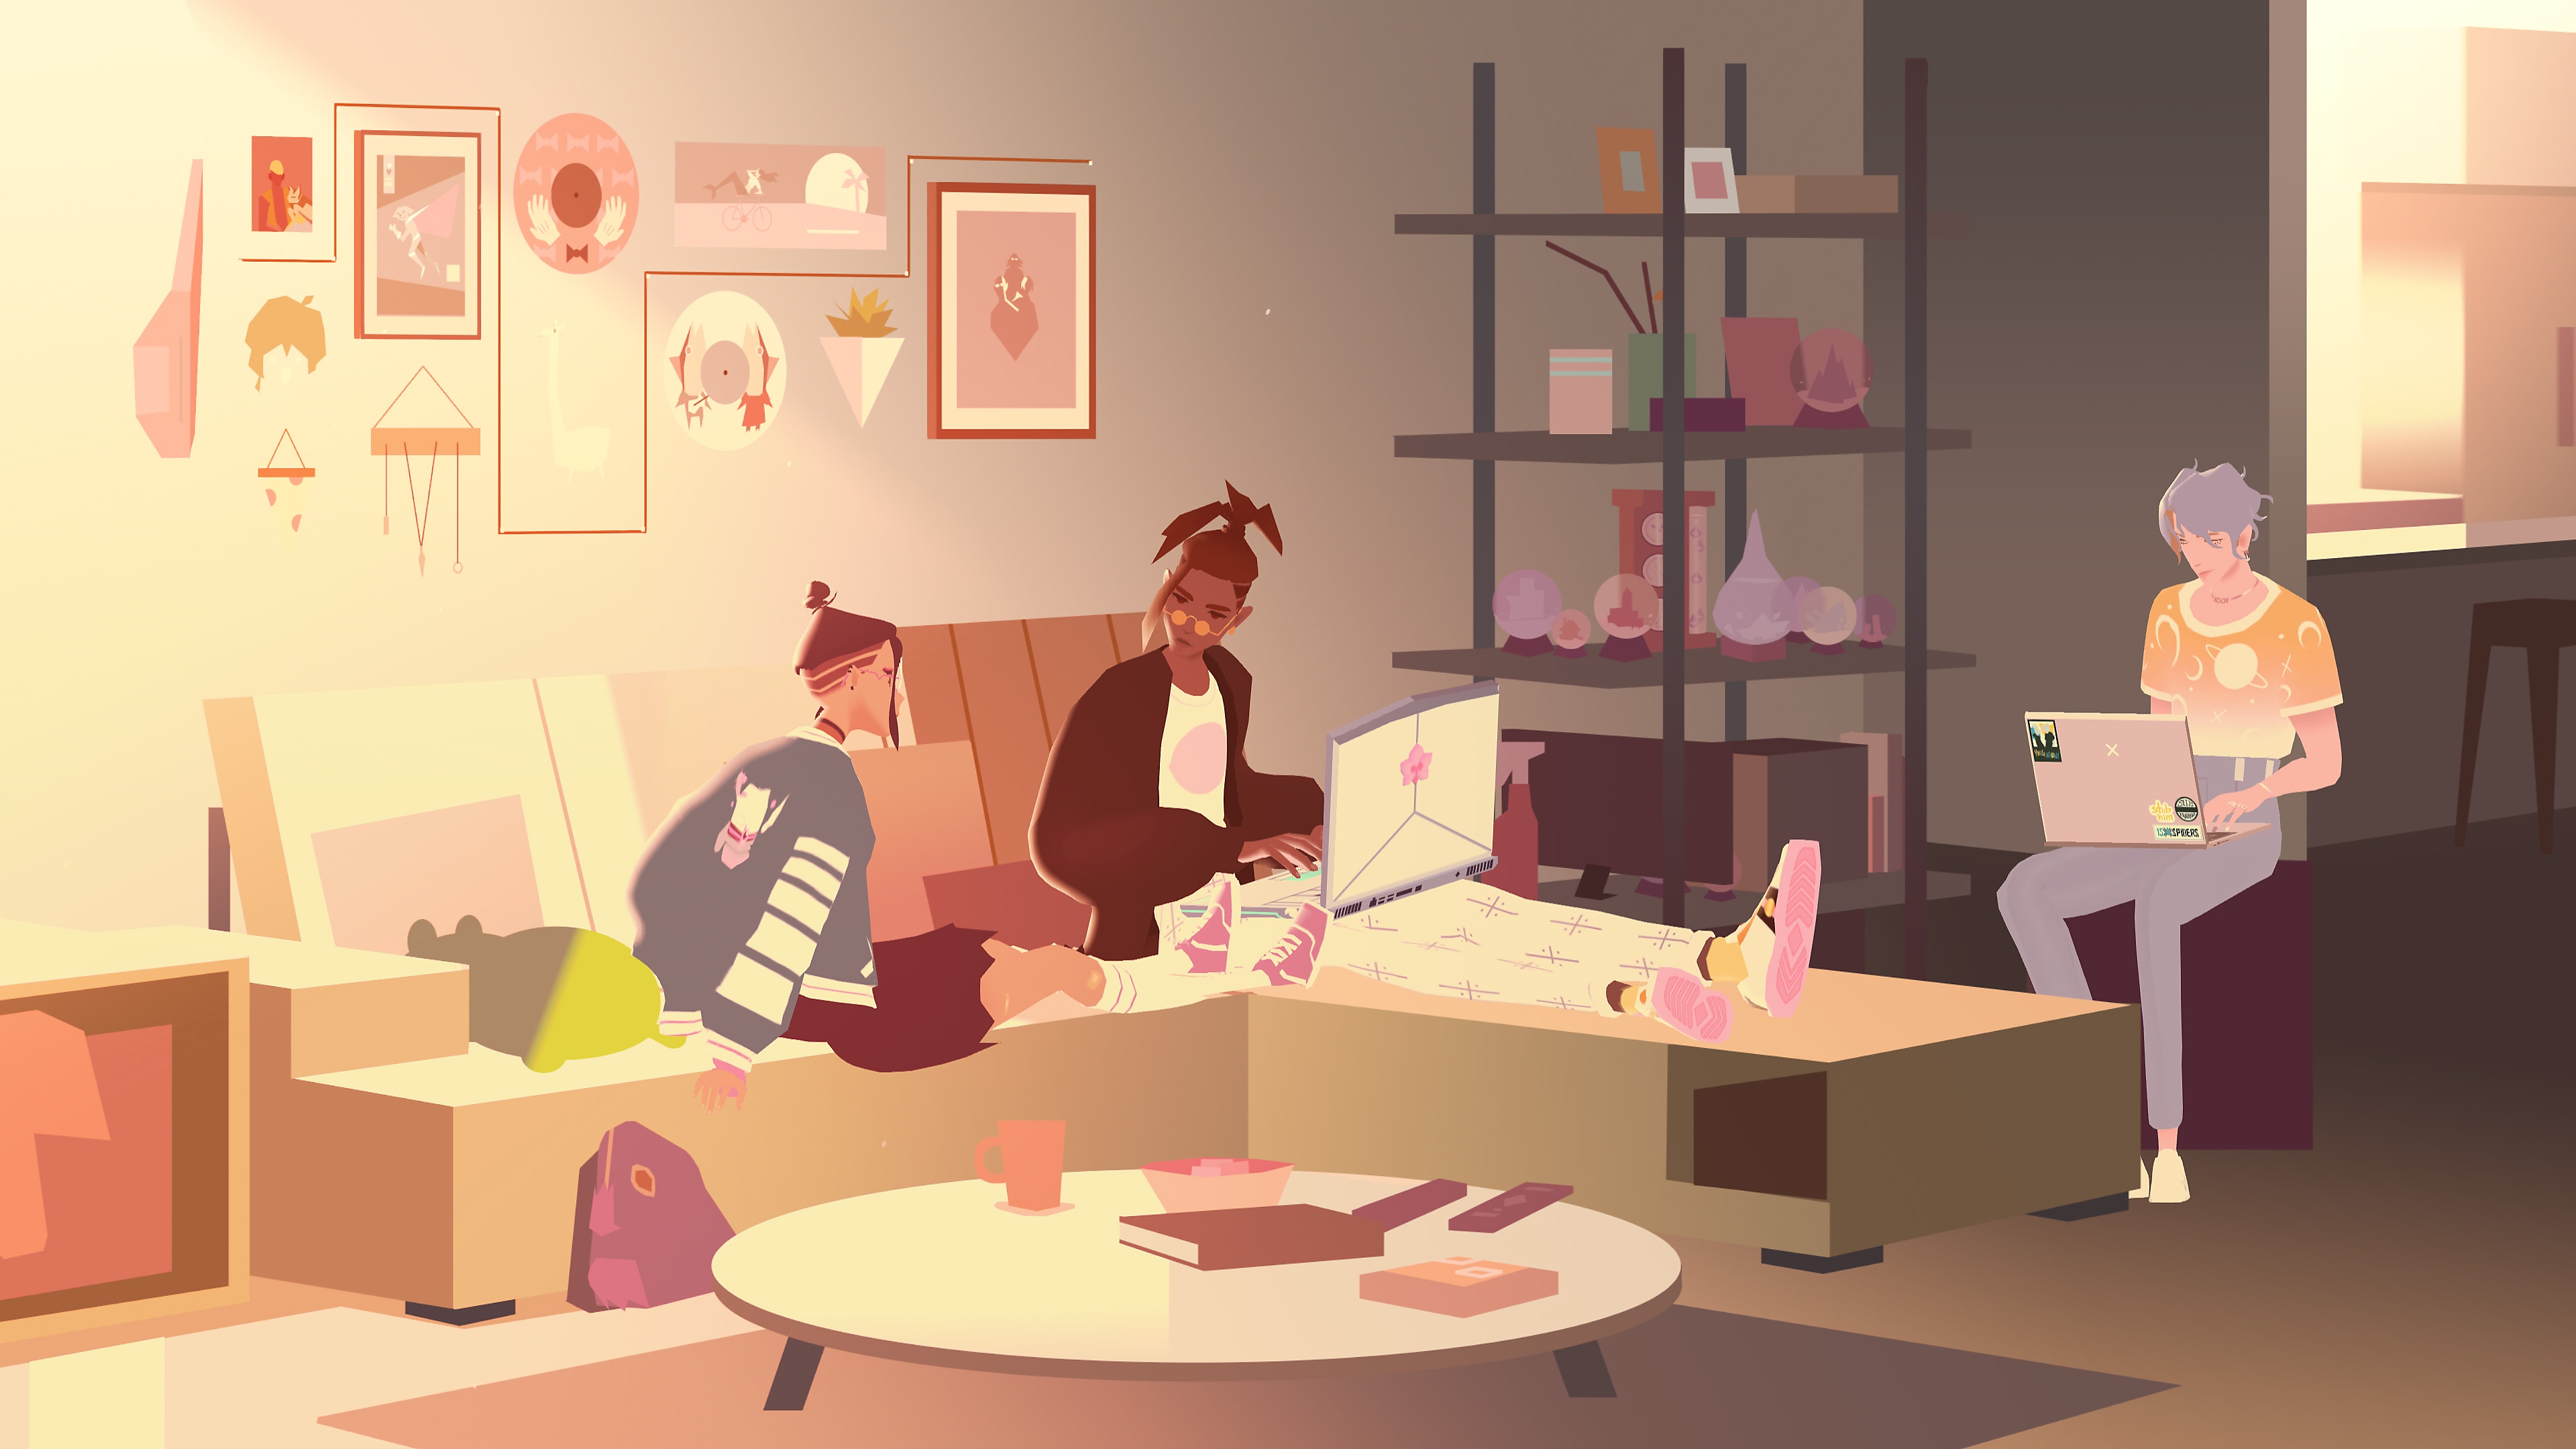 We Are OFK screenshot showing three characters in a living room